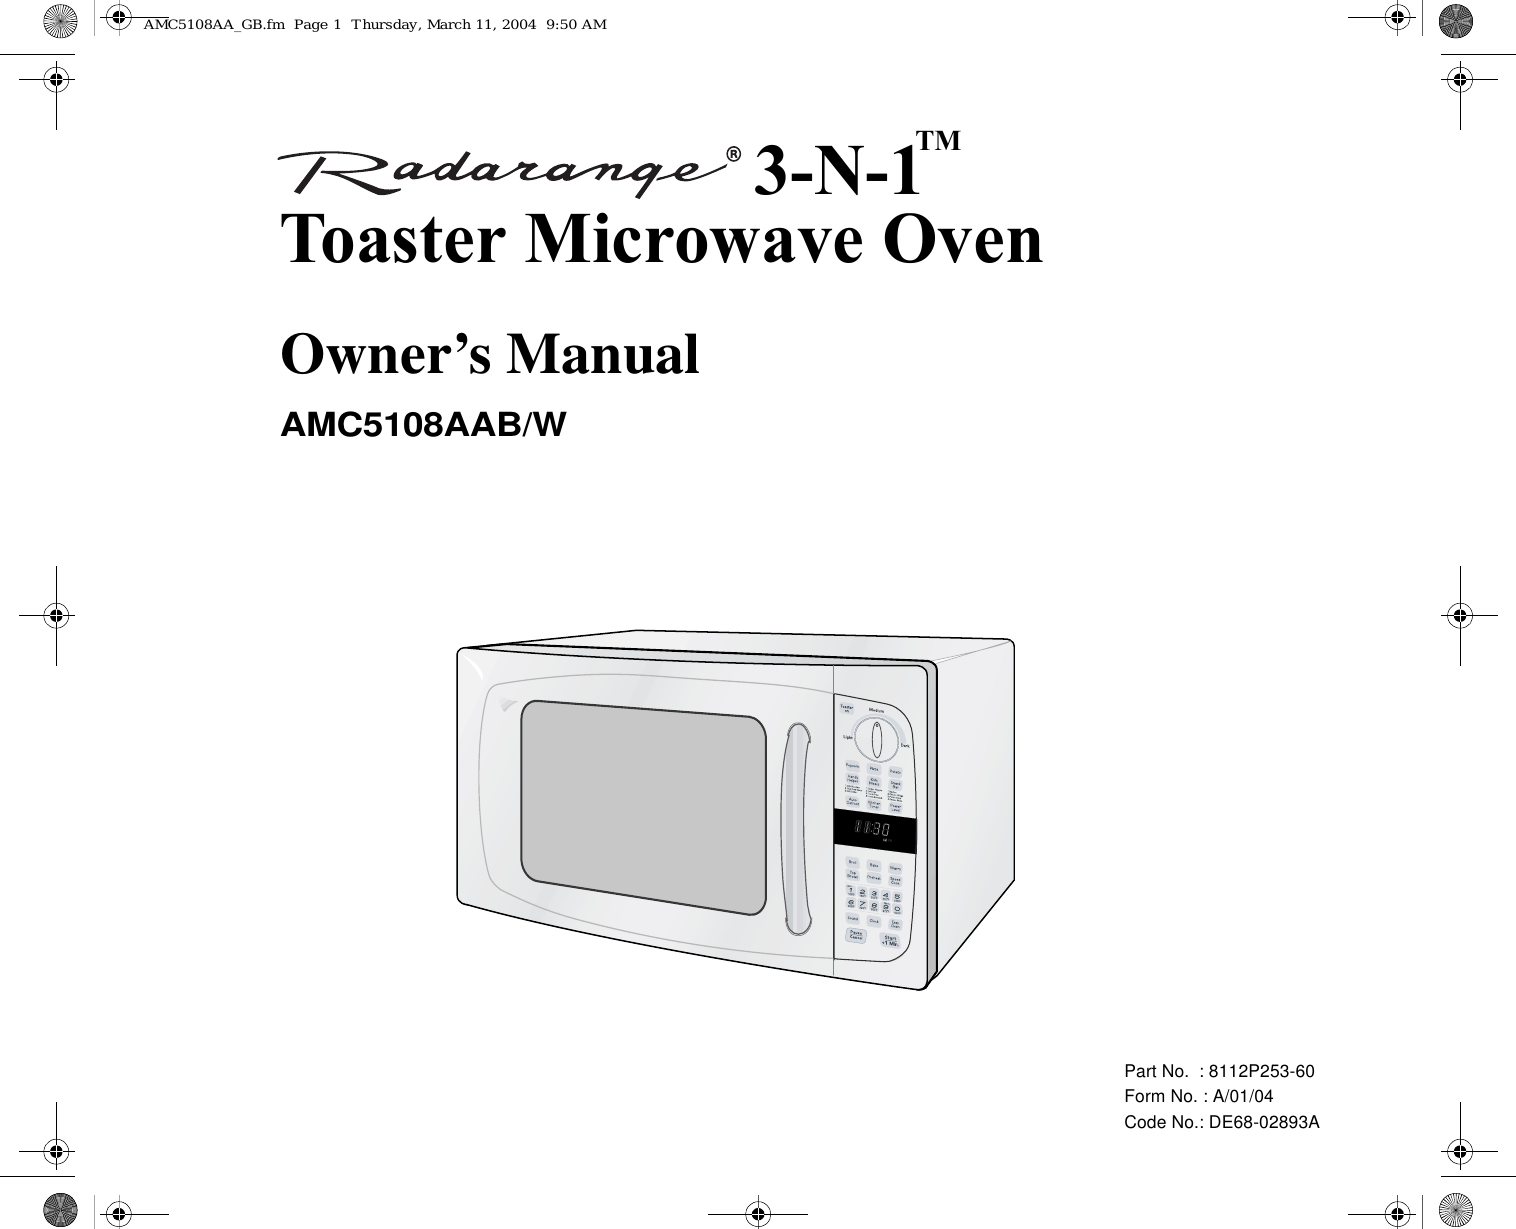 Part No.  : 8112P253-60Form No. : A/01/04Code No.: DE68-02893A3-N-1!!Toaster!Microwave!OvenAMC5108AAB/WOwner’s ManualTMAMC5108AA_GB.fm  Page 1  Thursday, March 11, 2004  9:50 AM